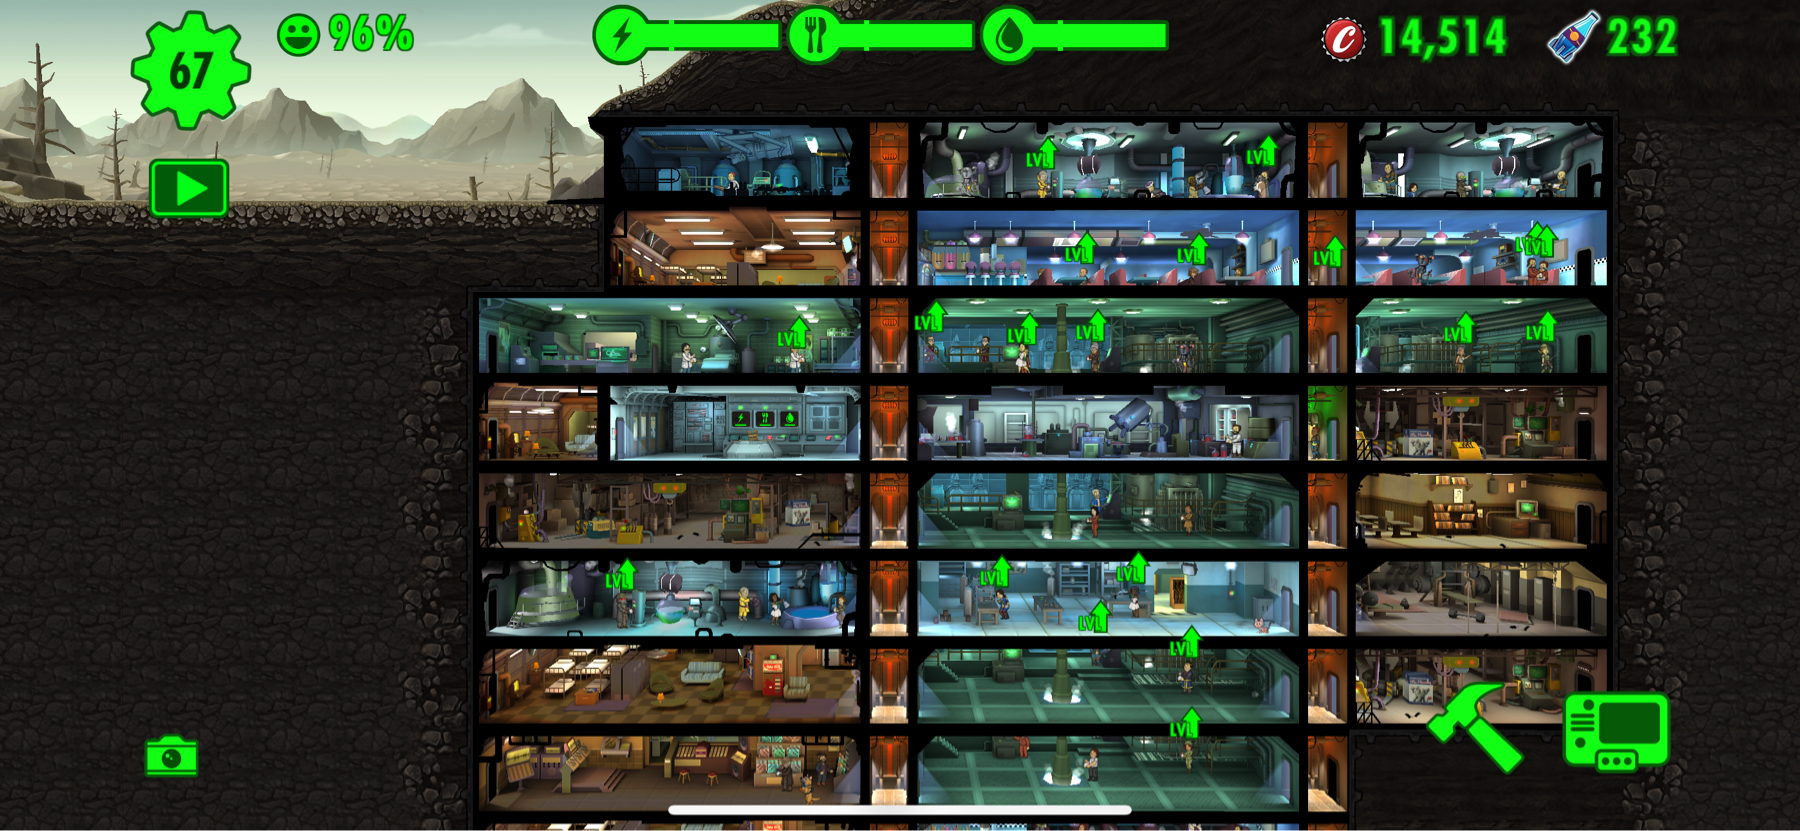 Screenshot of the simulation video game “Fallout Shelter,” showing an underground vault with various rooms and dwellers. There are resource meters at the top and game currency indicators on the top right.